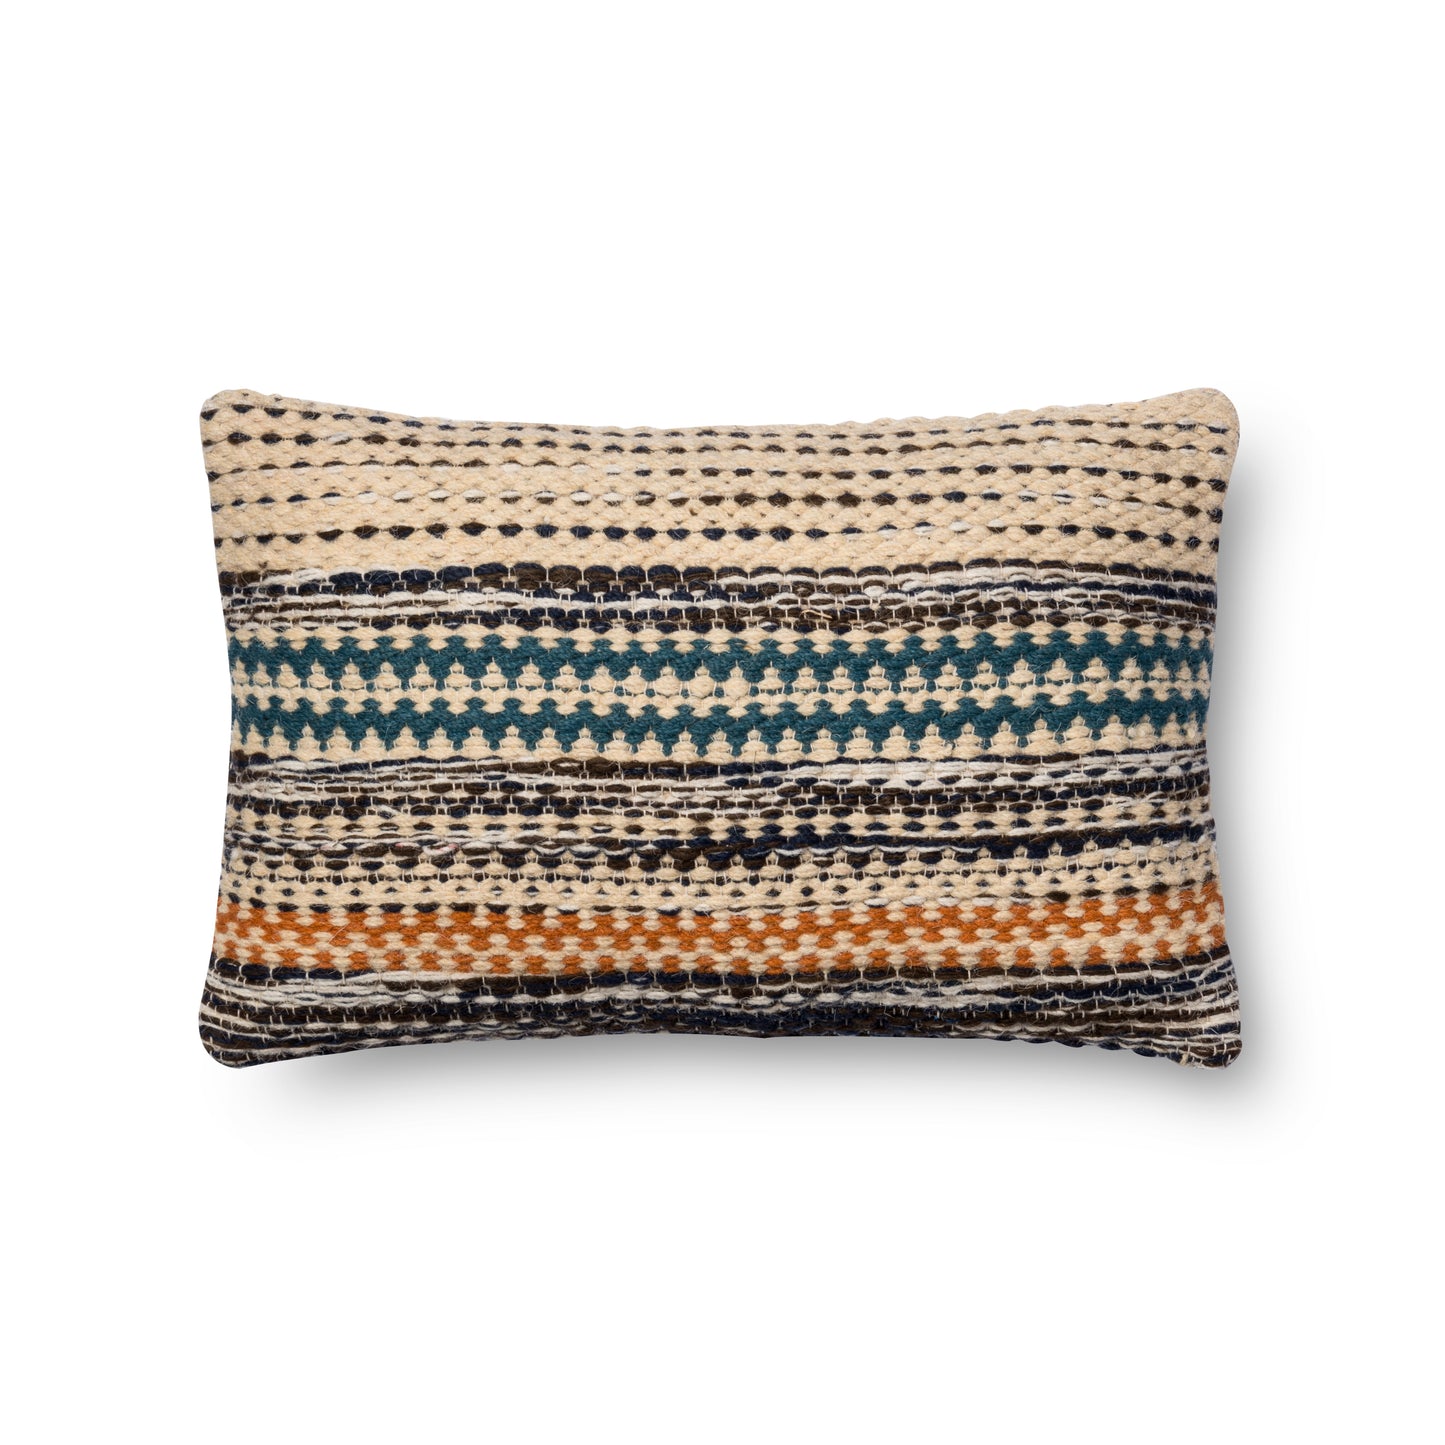 PILLOWS P1009 Synthetic Blend Indoor Pillow from Magnolia Home by Joanna Gaines x Loloi